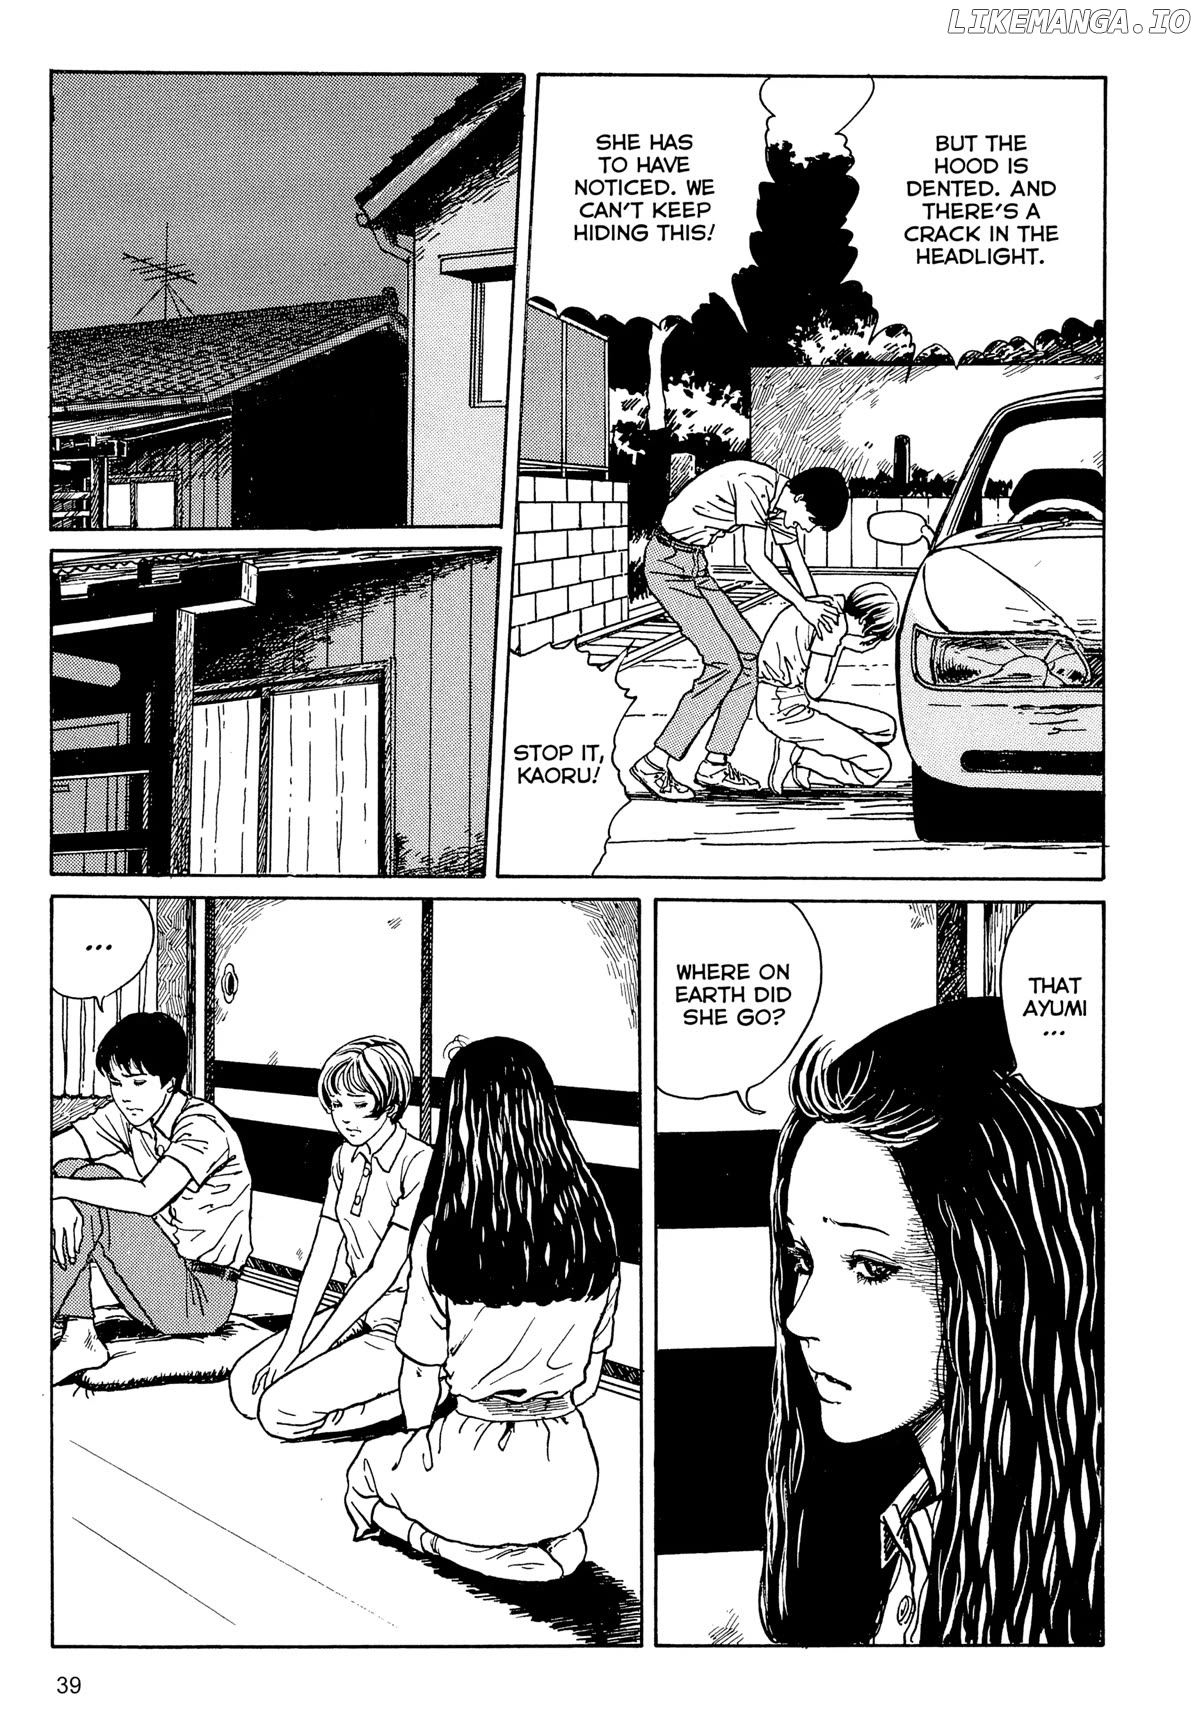 Tombs - Junji Ito Story Collection chapter 1 - page 40